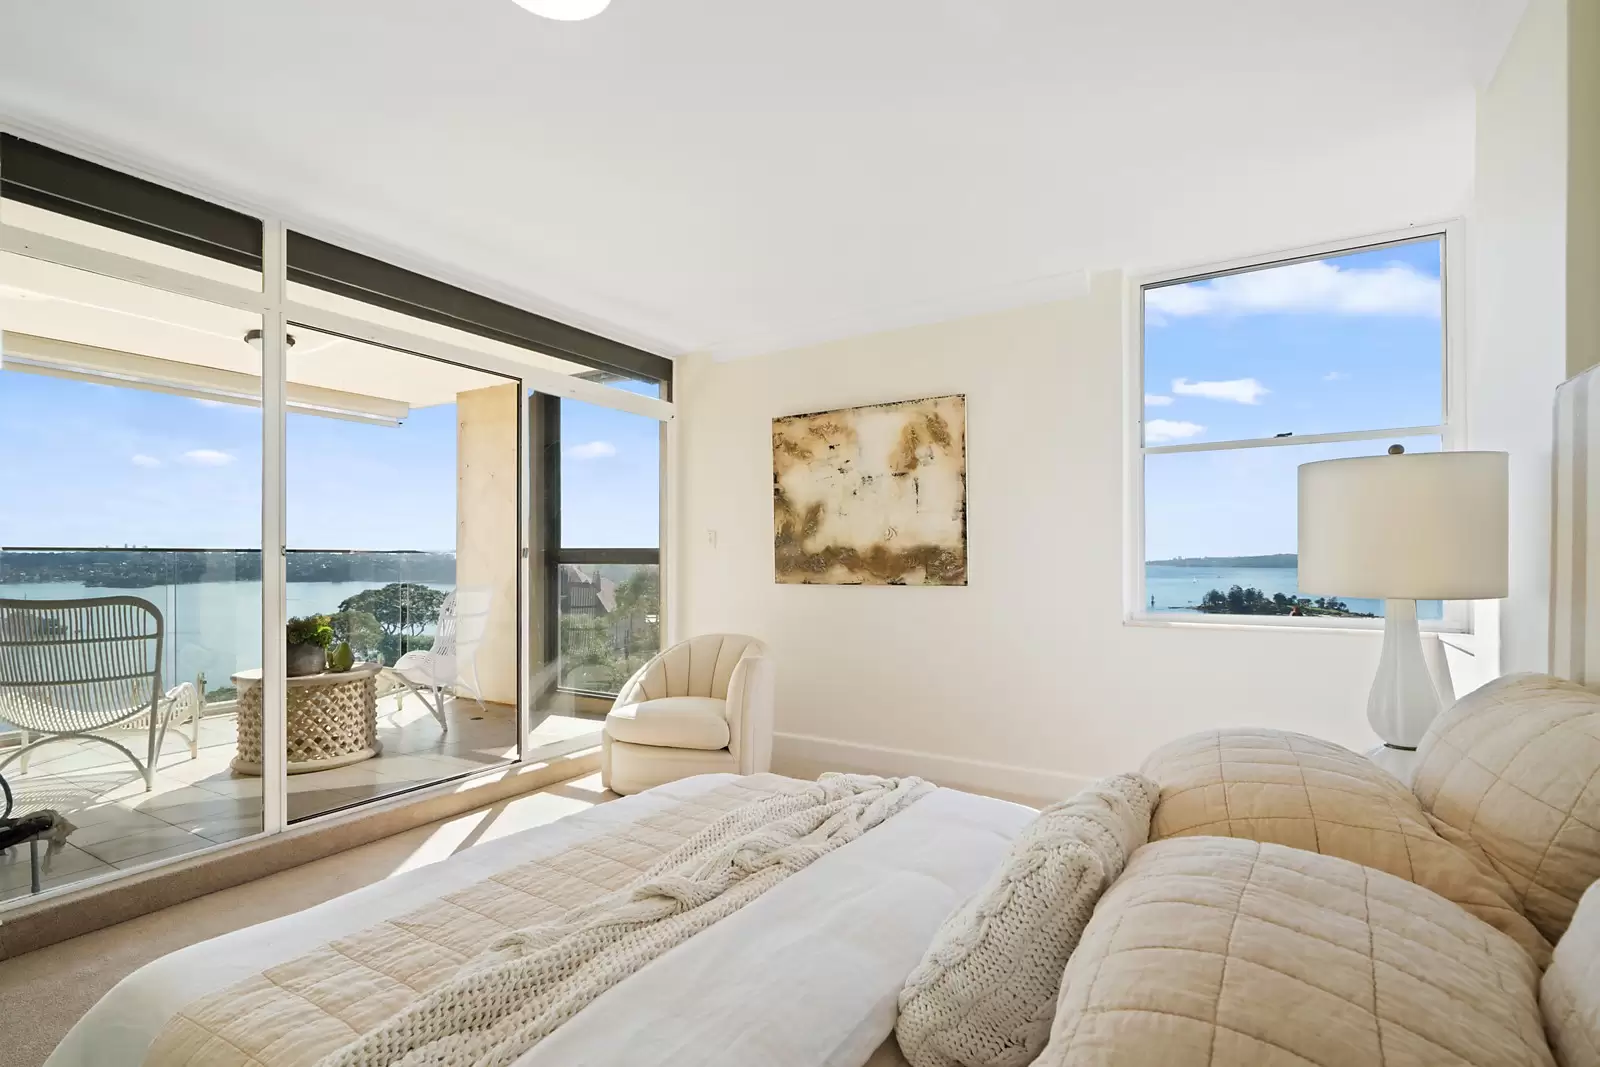 Photo #12: 13/8 Wentworth Street, Point Piper - Sold by Sydney Sotheby's International Realty